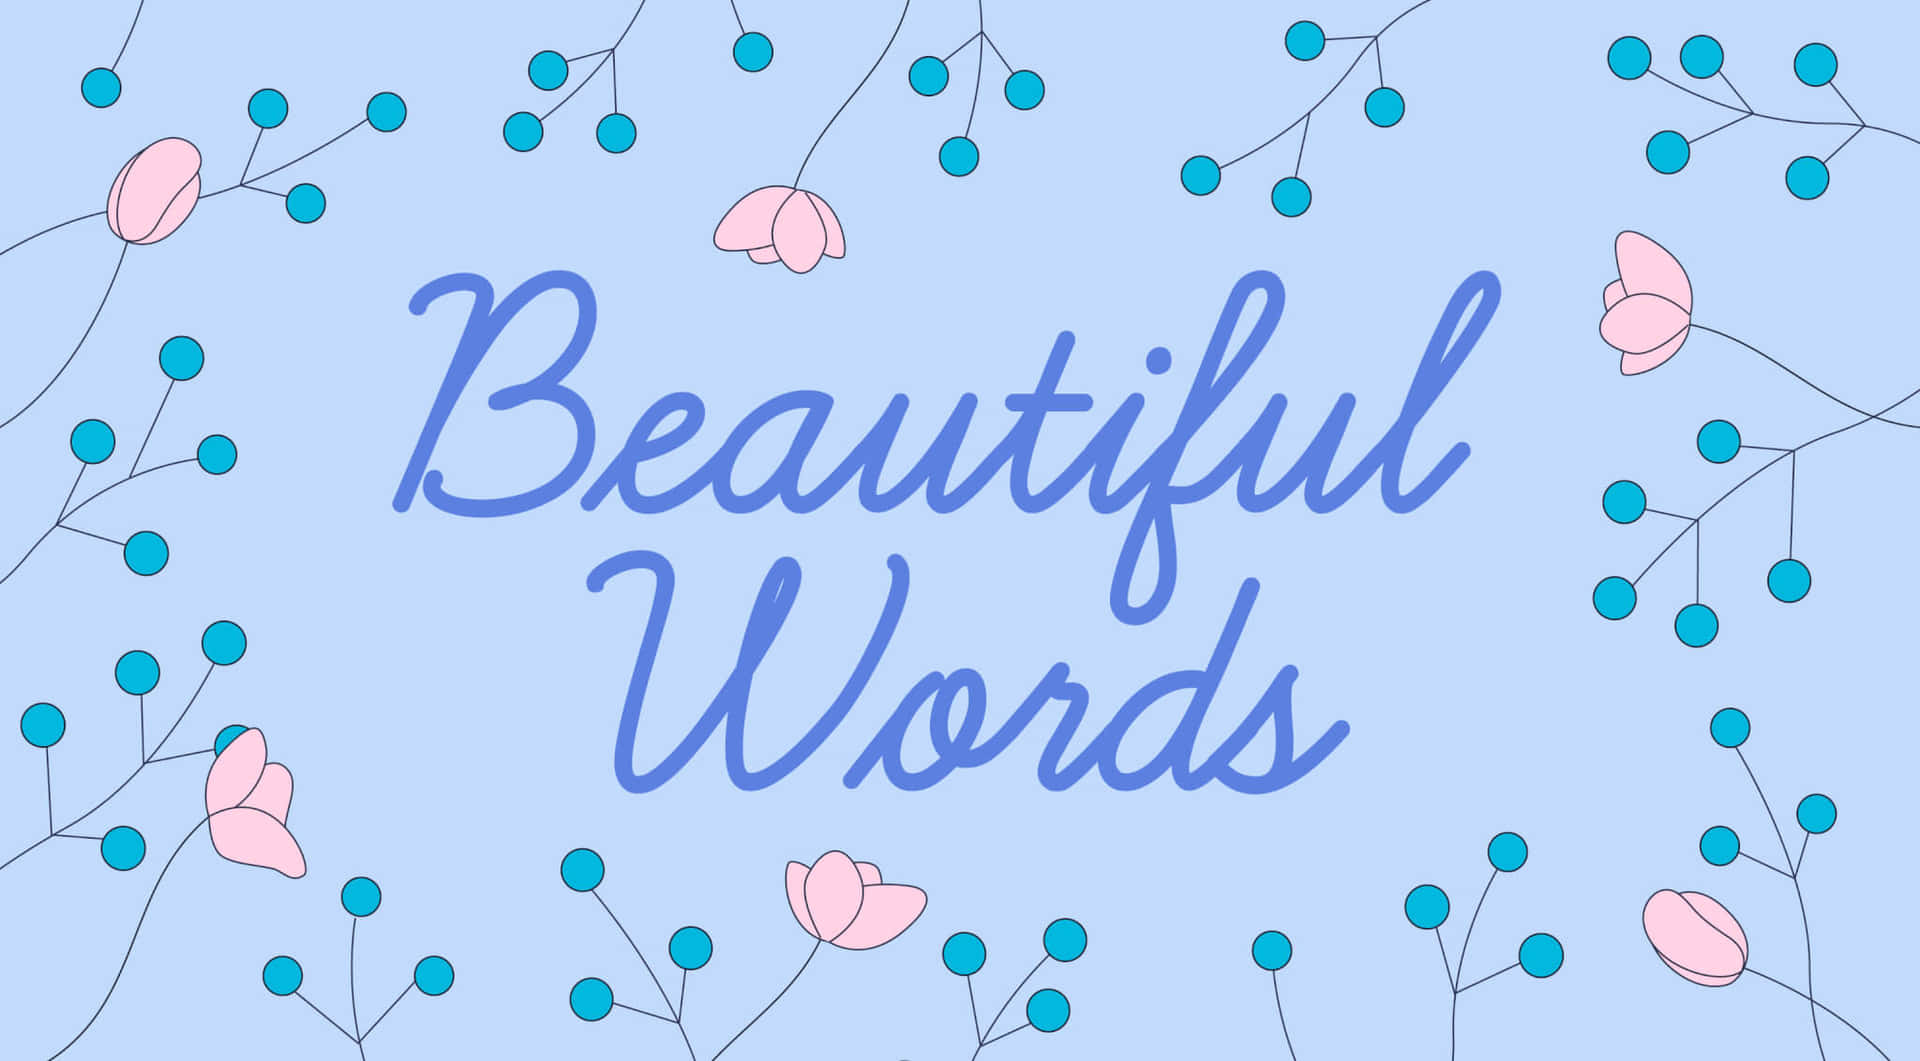 Words with Aesthetic Beauty